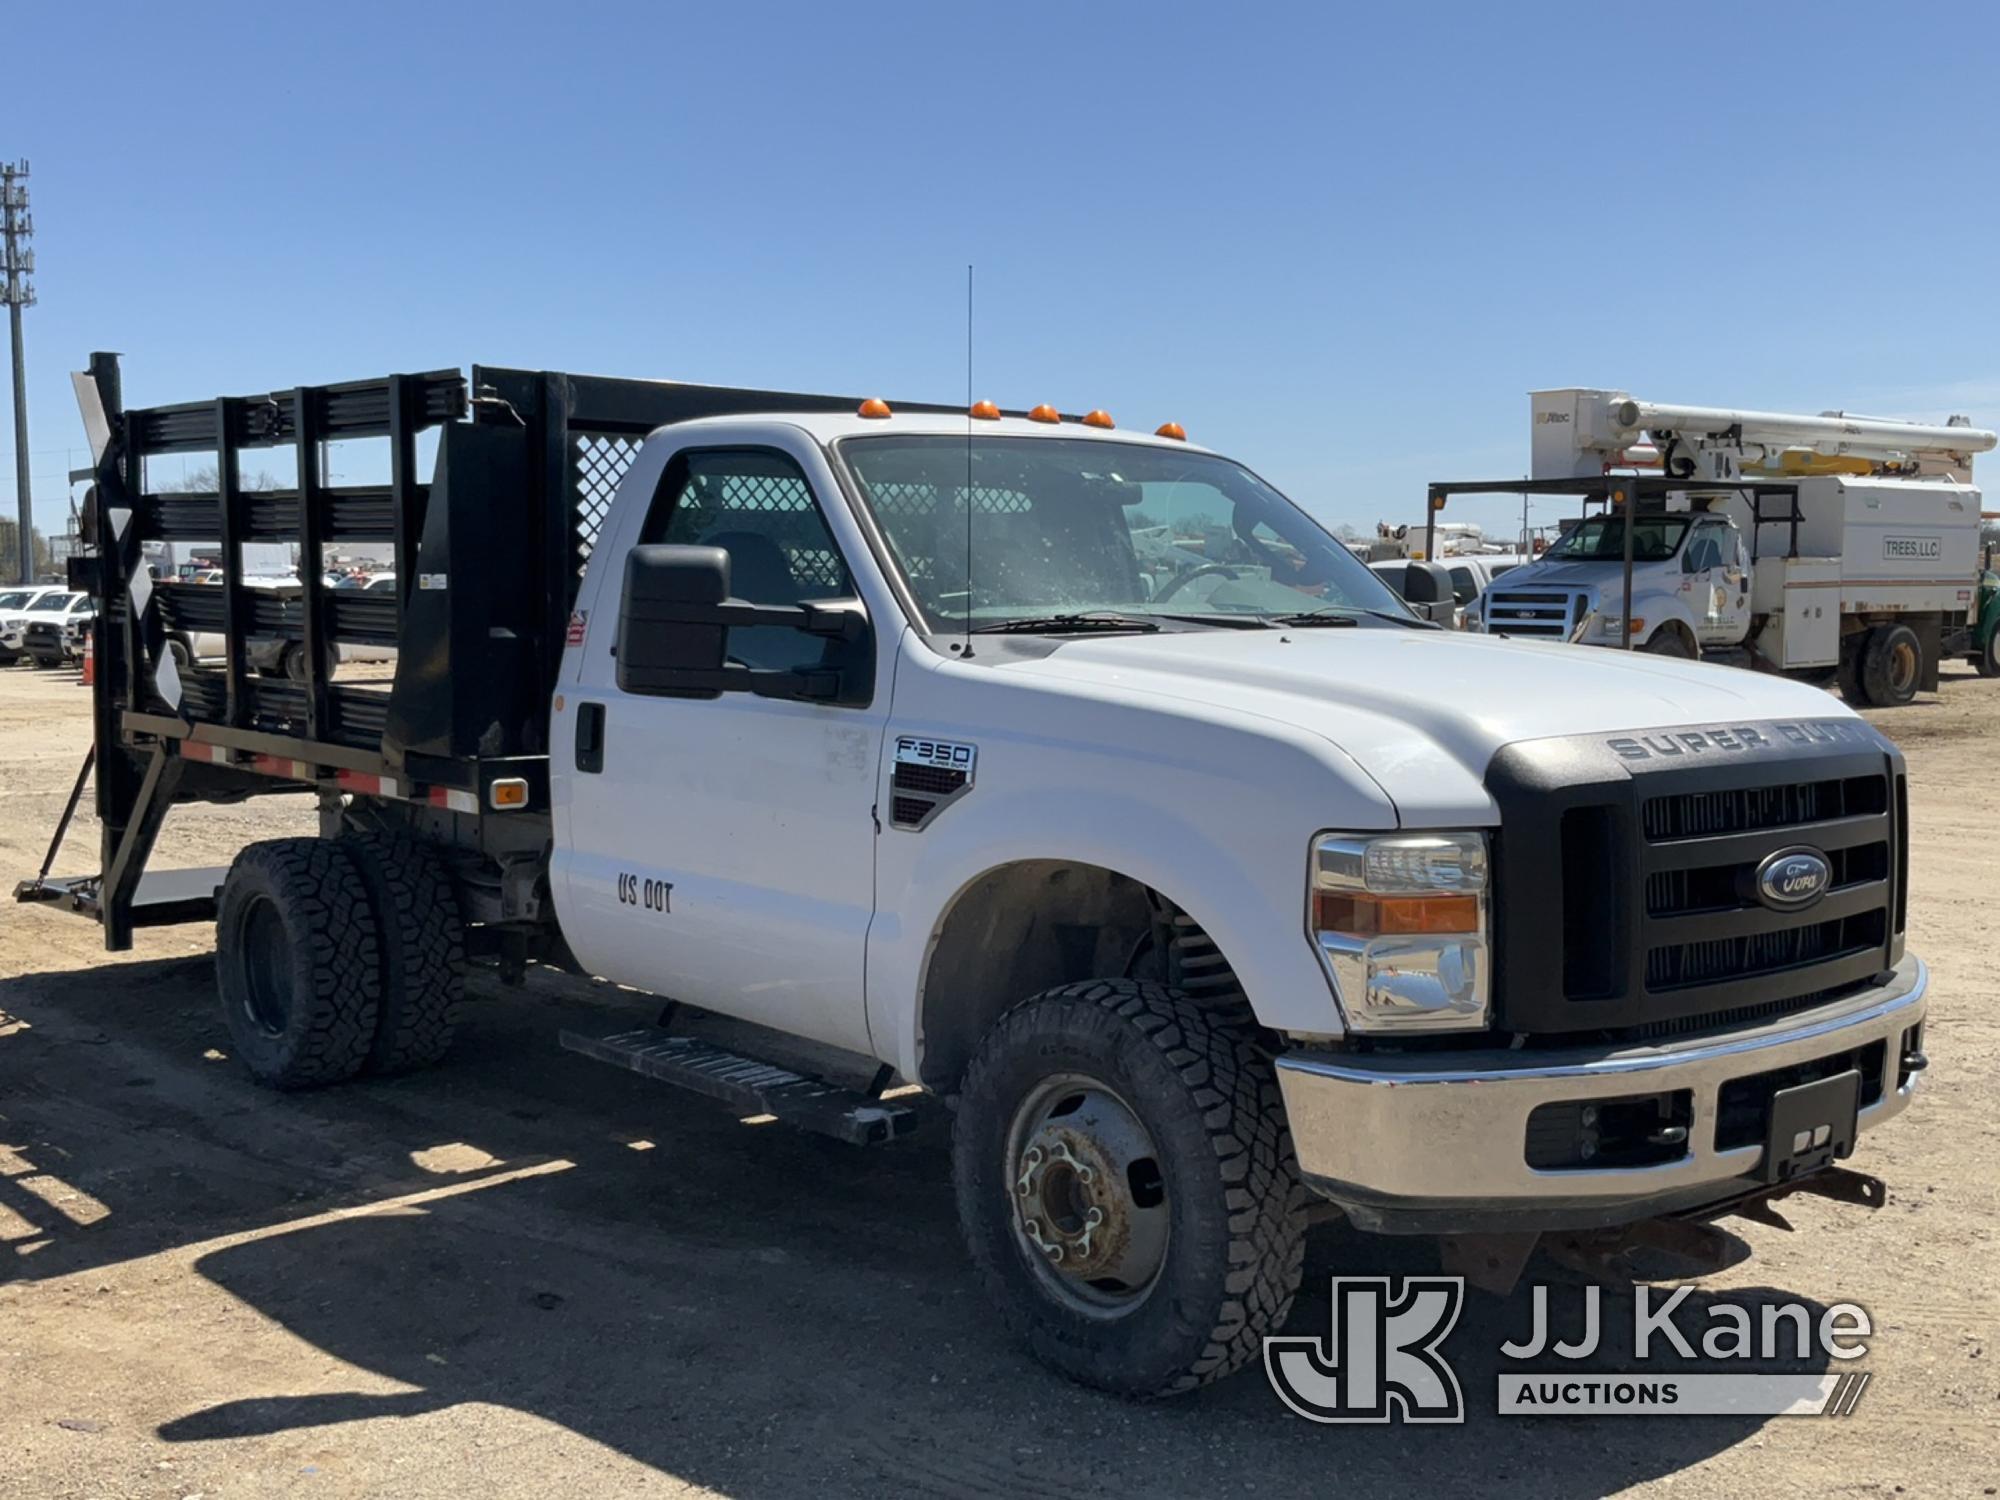 (Charlotte, MI) 2008 Ford F350 4x4 Flatbed Truck Runs, Moves, Rust, Rotted Boards On Bed